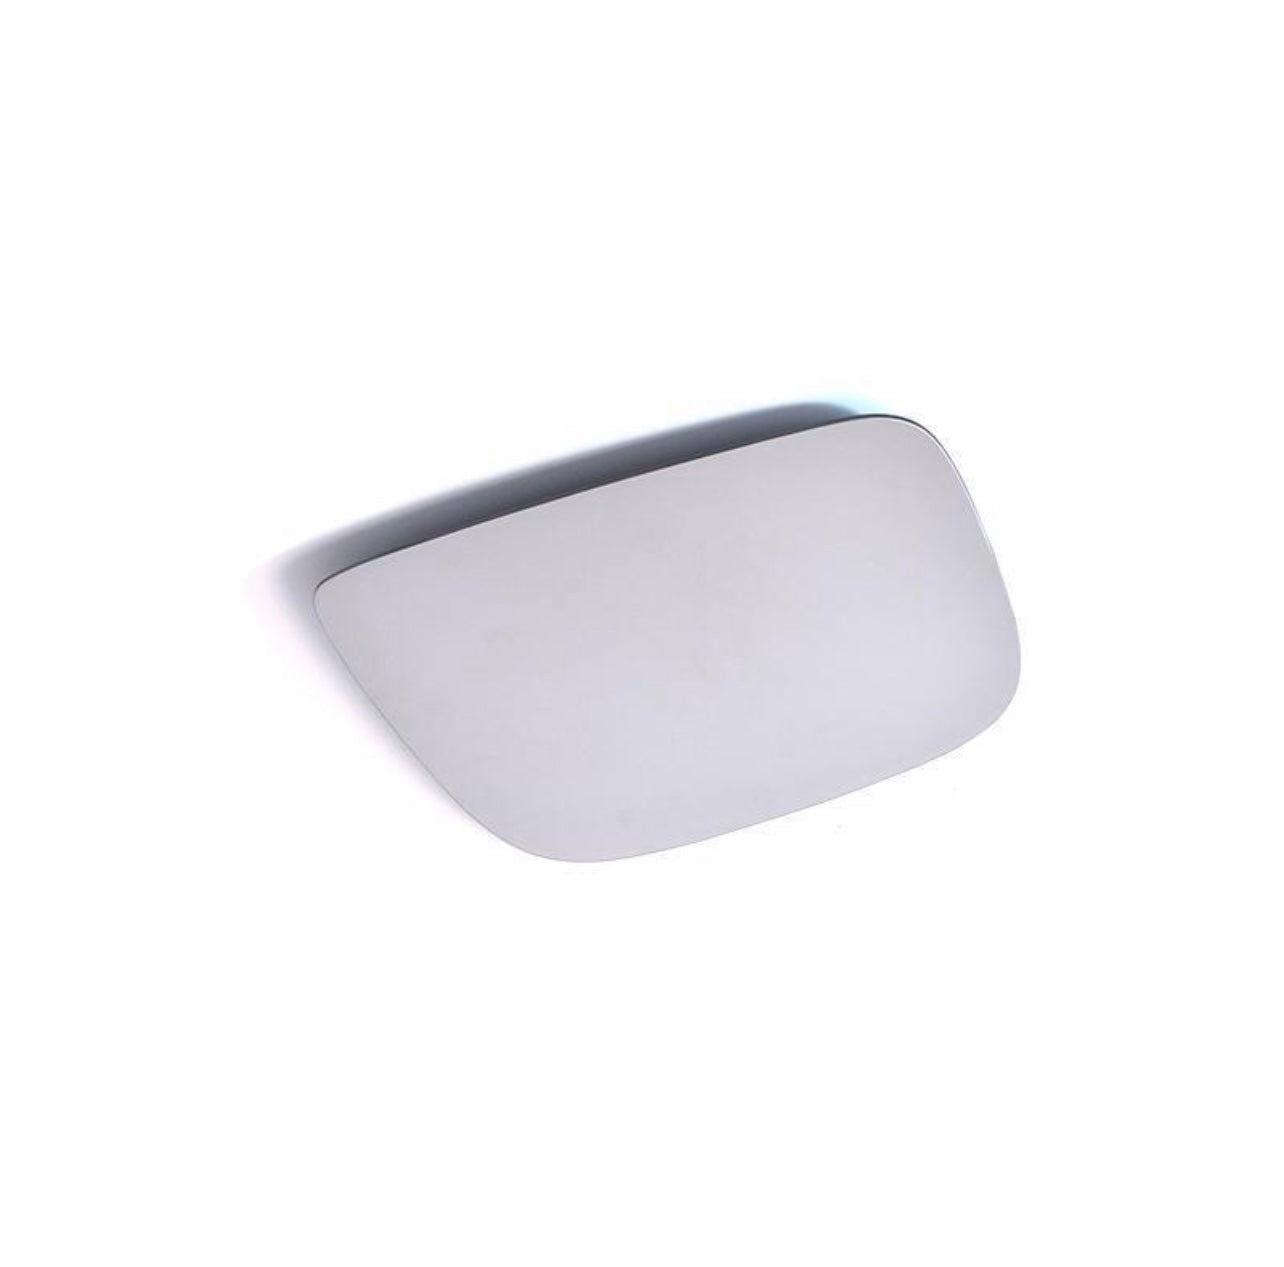 VOLVO XC60 2008 - 2017 Driving Side Heated Car Mirror Glass